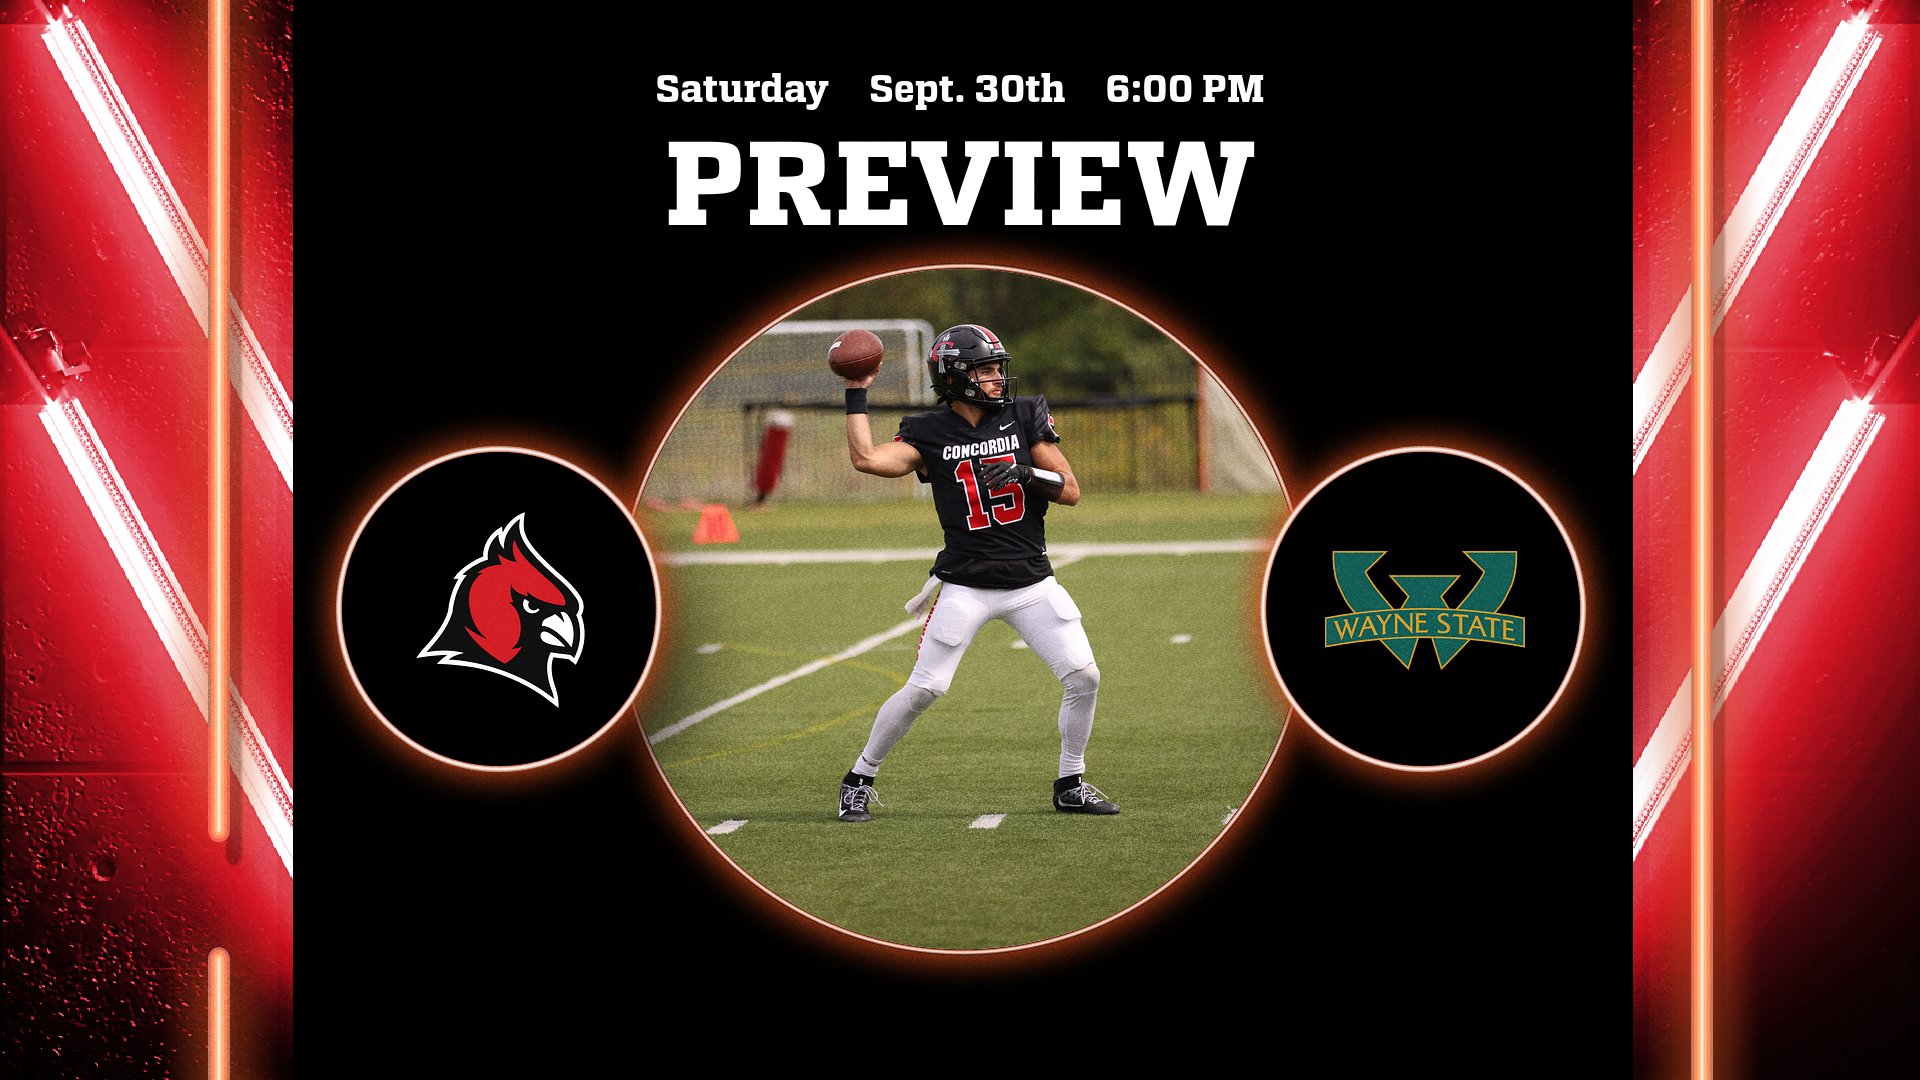 WEEK 4 GAME NOTES: FOOTBALL PREPS FOR NCAA DIVISION II WAYNE STATE